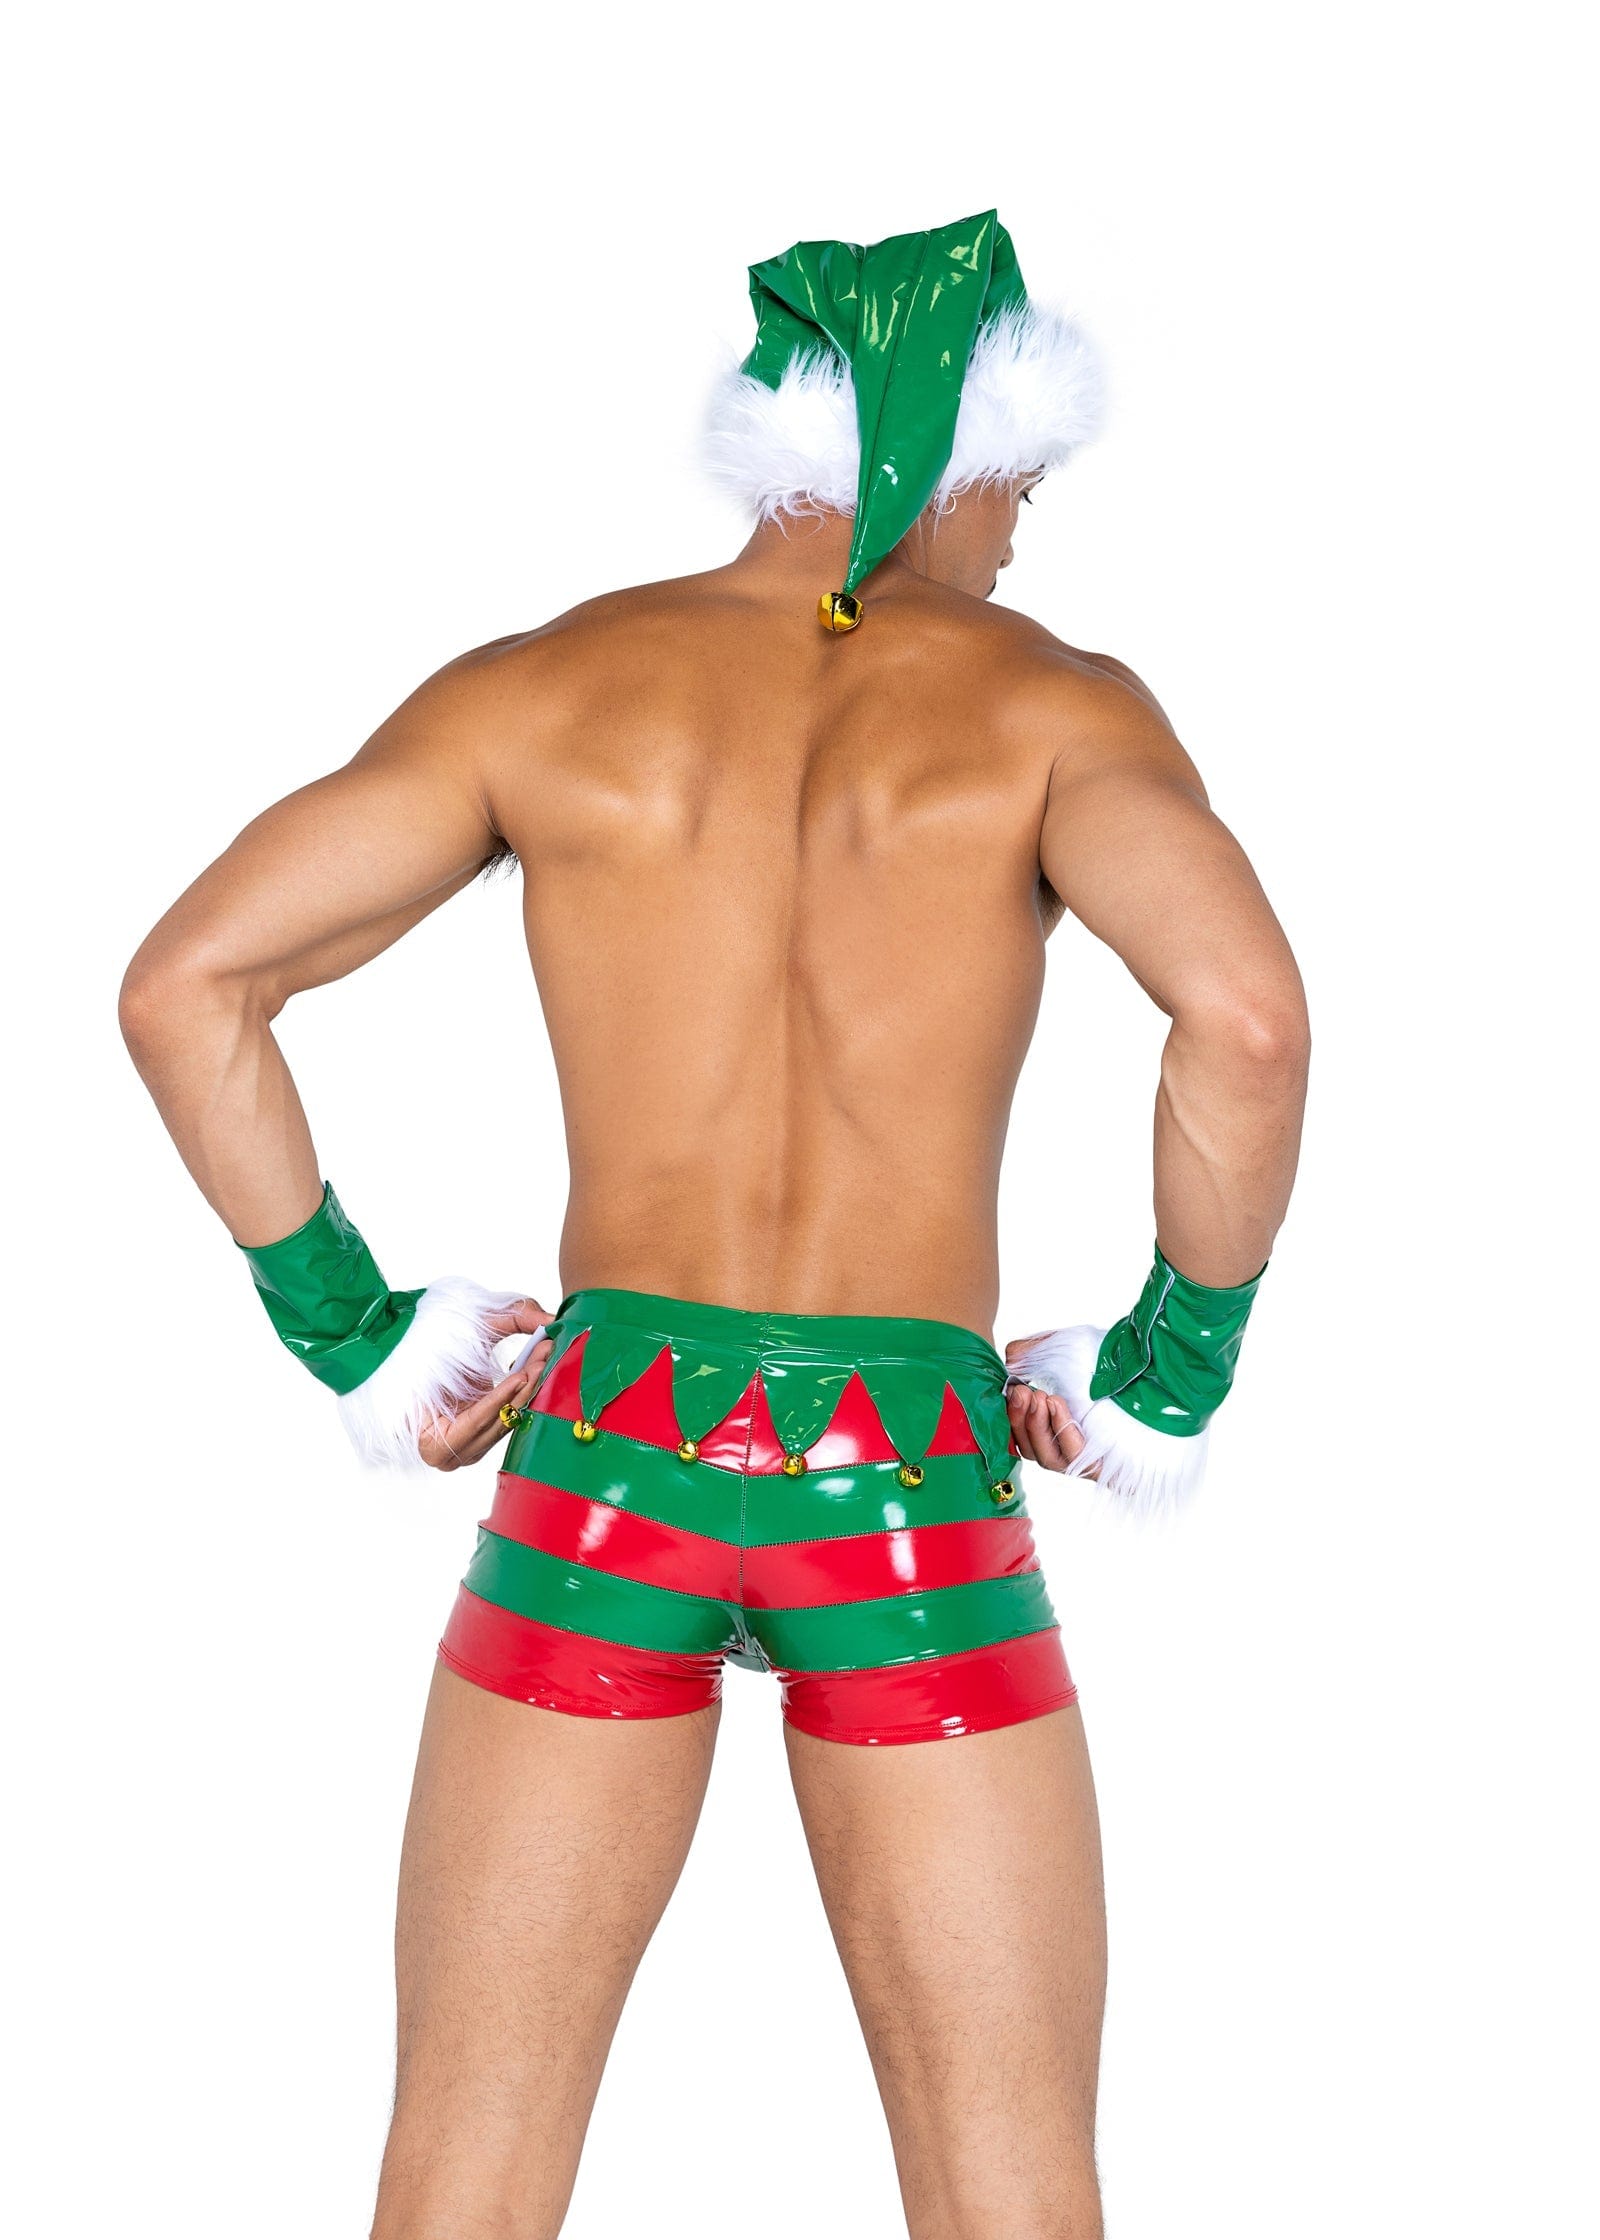 Roma Green / Small 3 Pc Men's Green & Red Vinyl Naughty Elf Christmas Holiday Cosplay Costume LI579-Green/Red-S 2023 Sexy Men's Construction Worker Halloween Cosplay Costume Apparel & Accessories > Costumes & Accessories